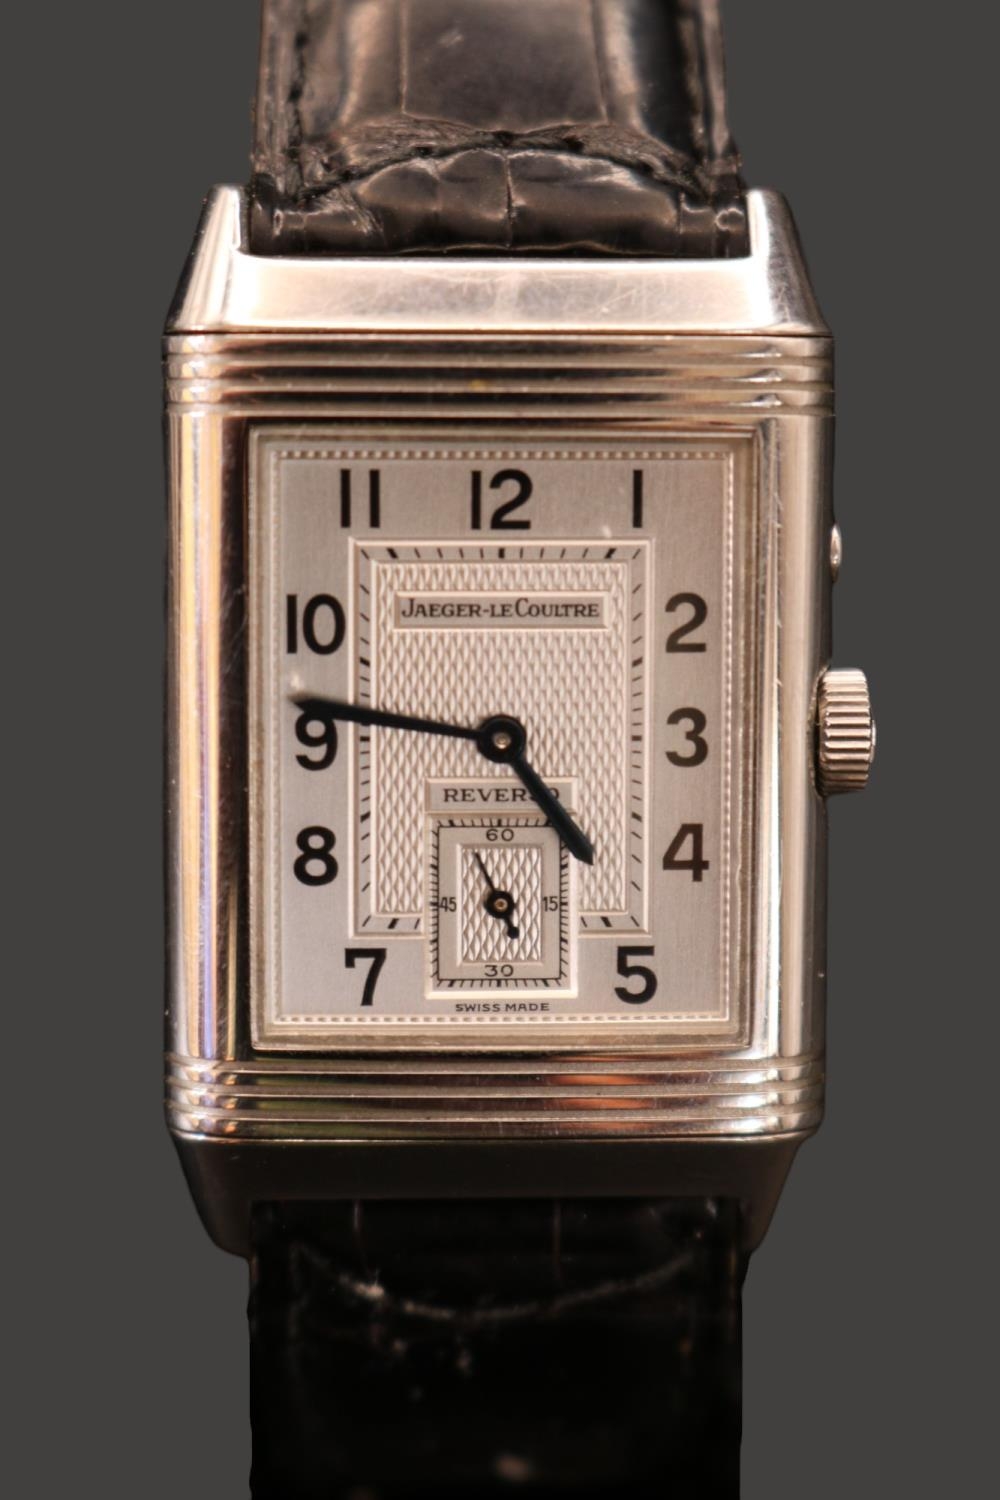 Jaeger LeCoultre Reverso, Day & Night manual wind Swiss movement with box & papers. Reference no